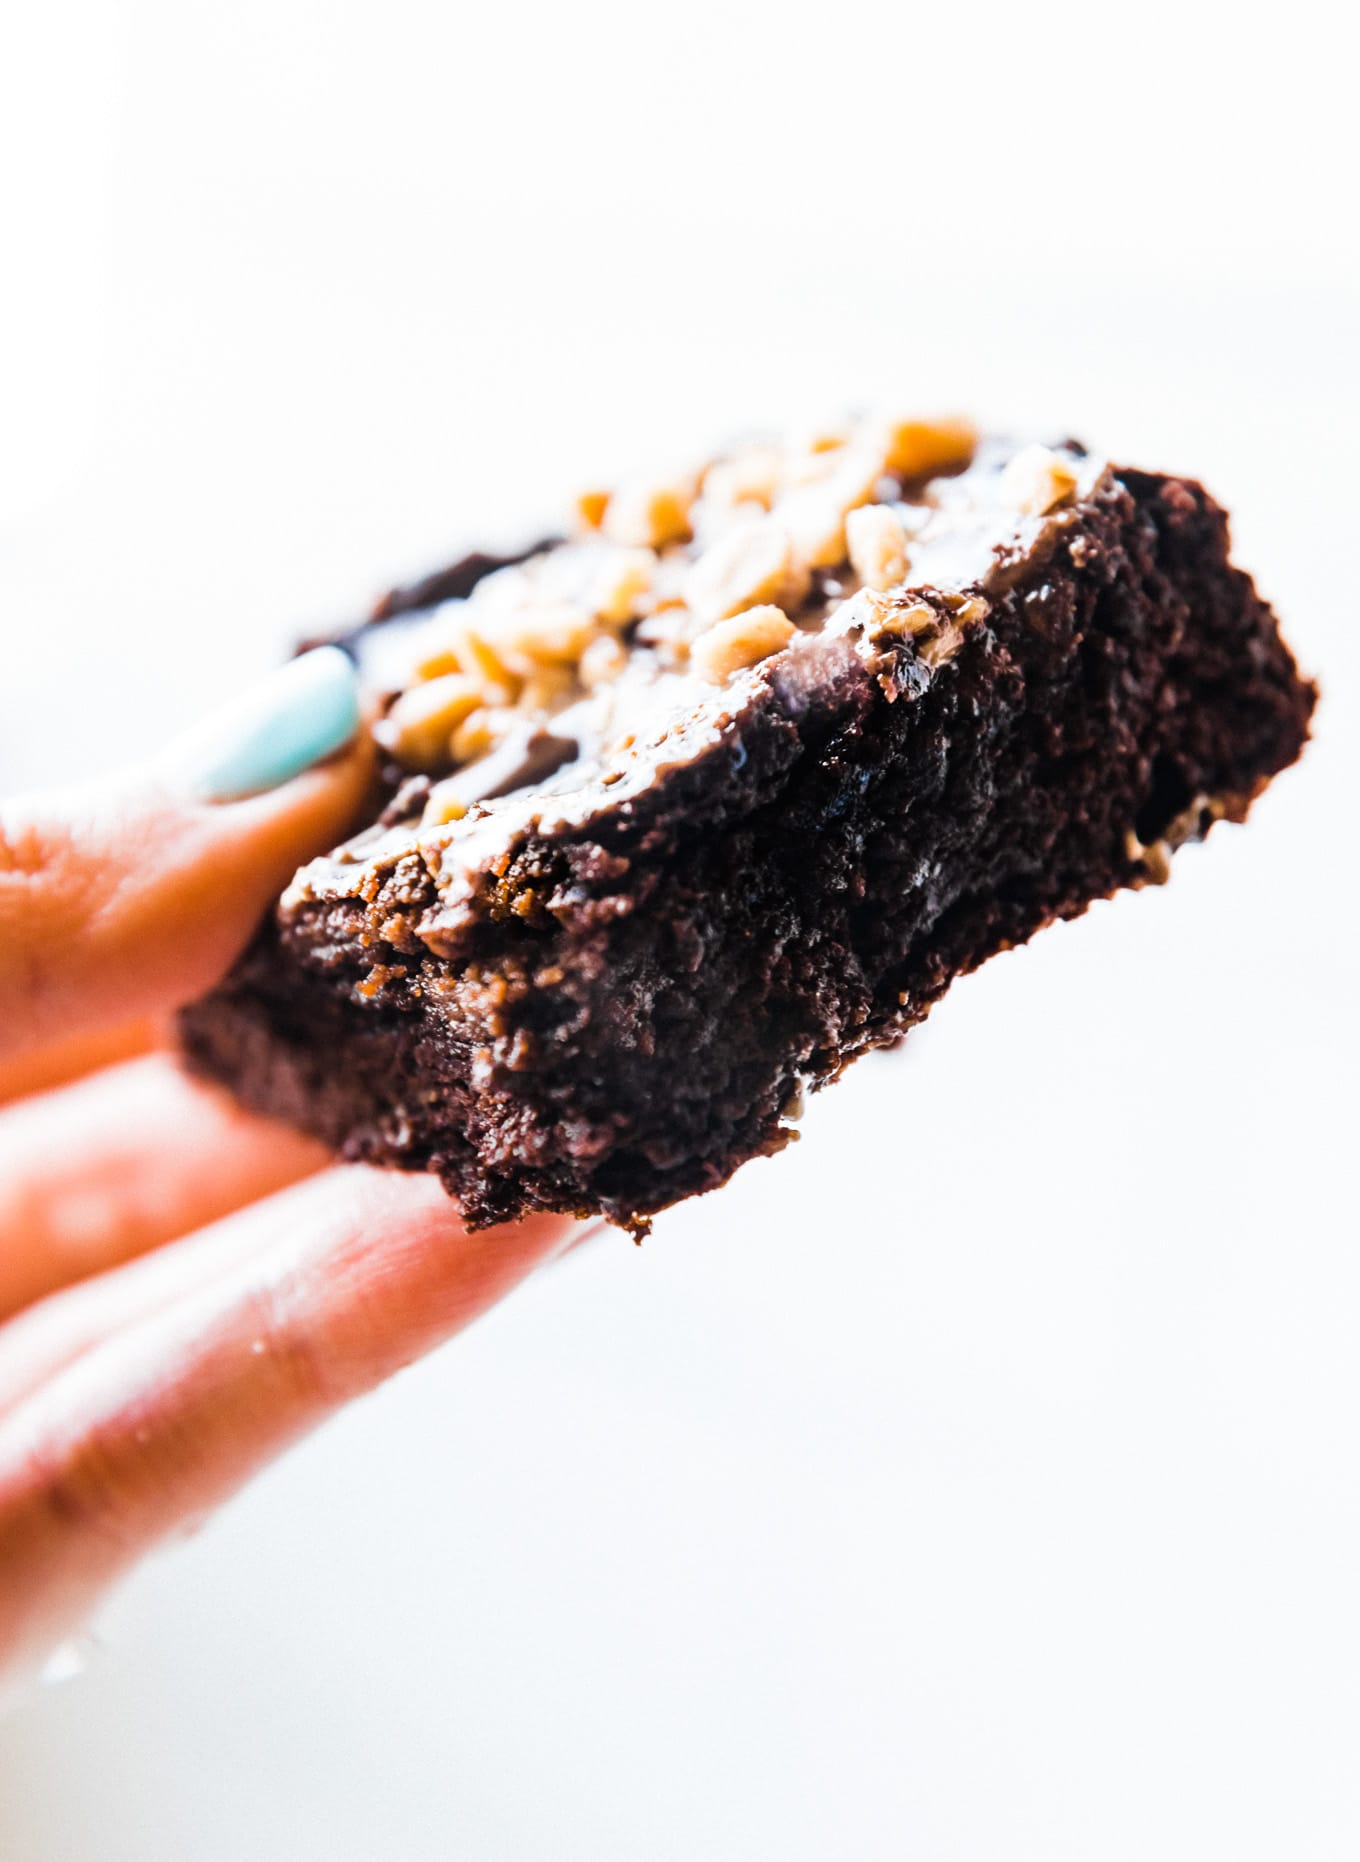 A square piece of low carb brownie with chocolate tahini topping and crushed nuts being held up against white background.